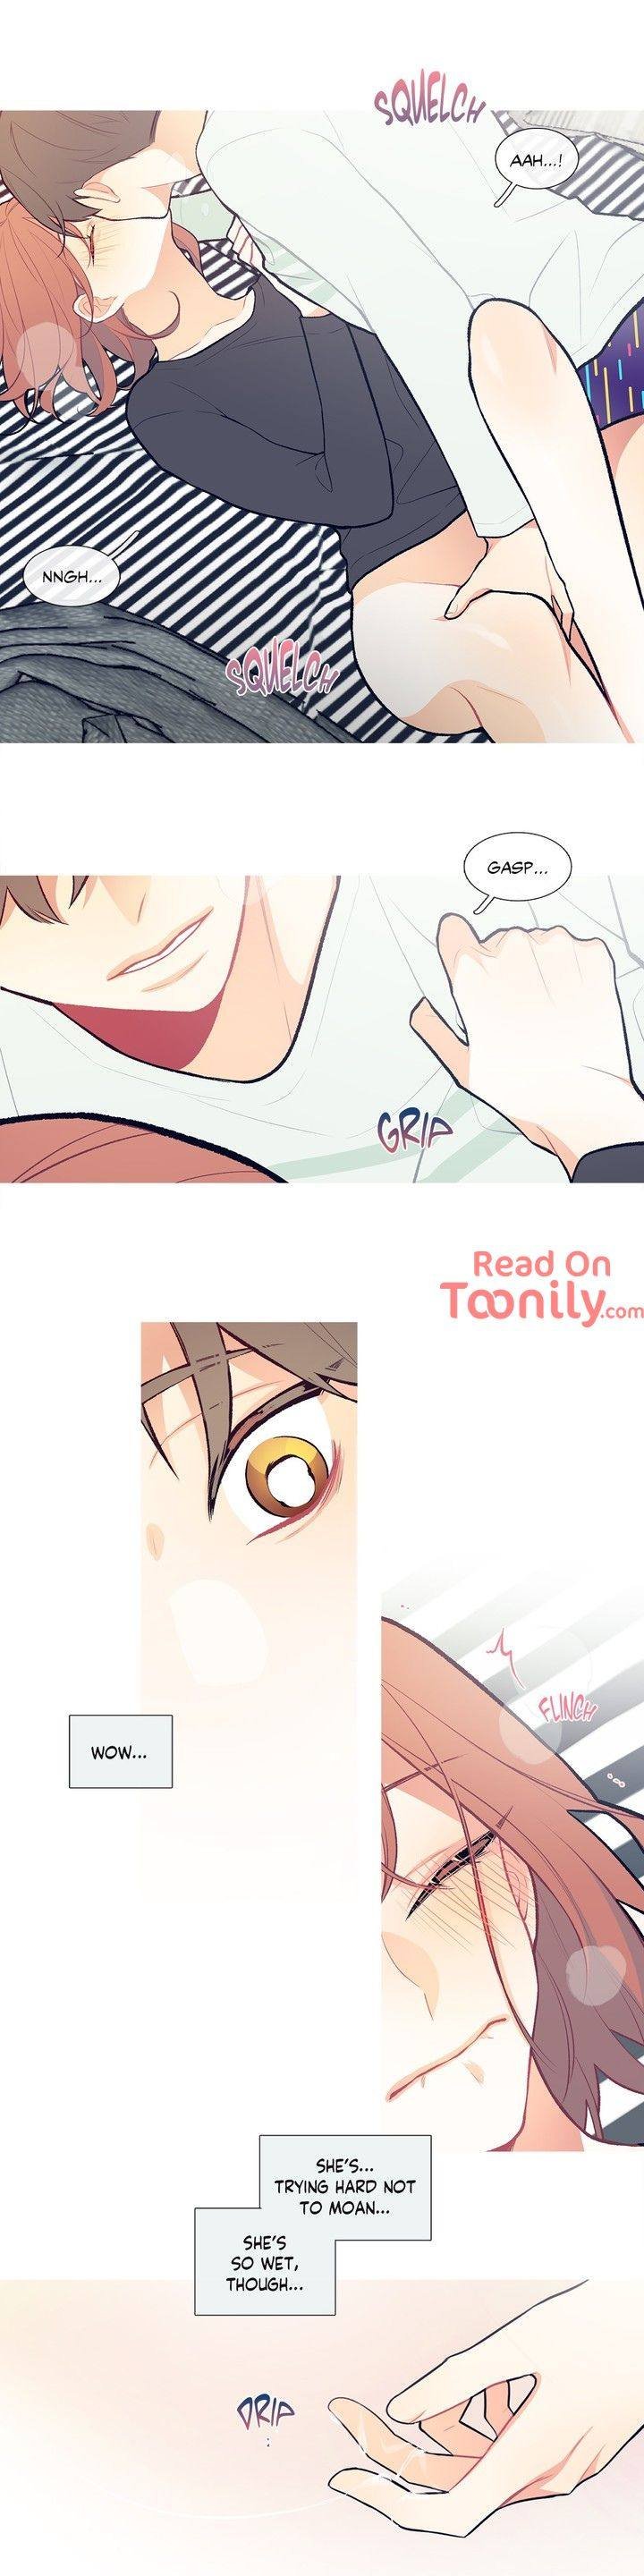 whats-going-on-chap-4-9